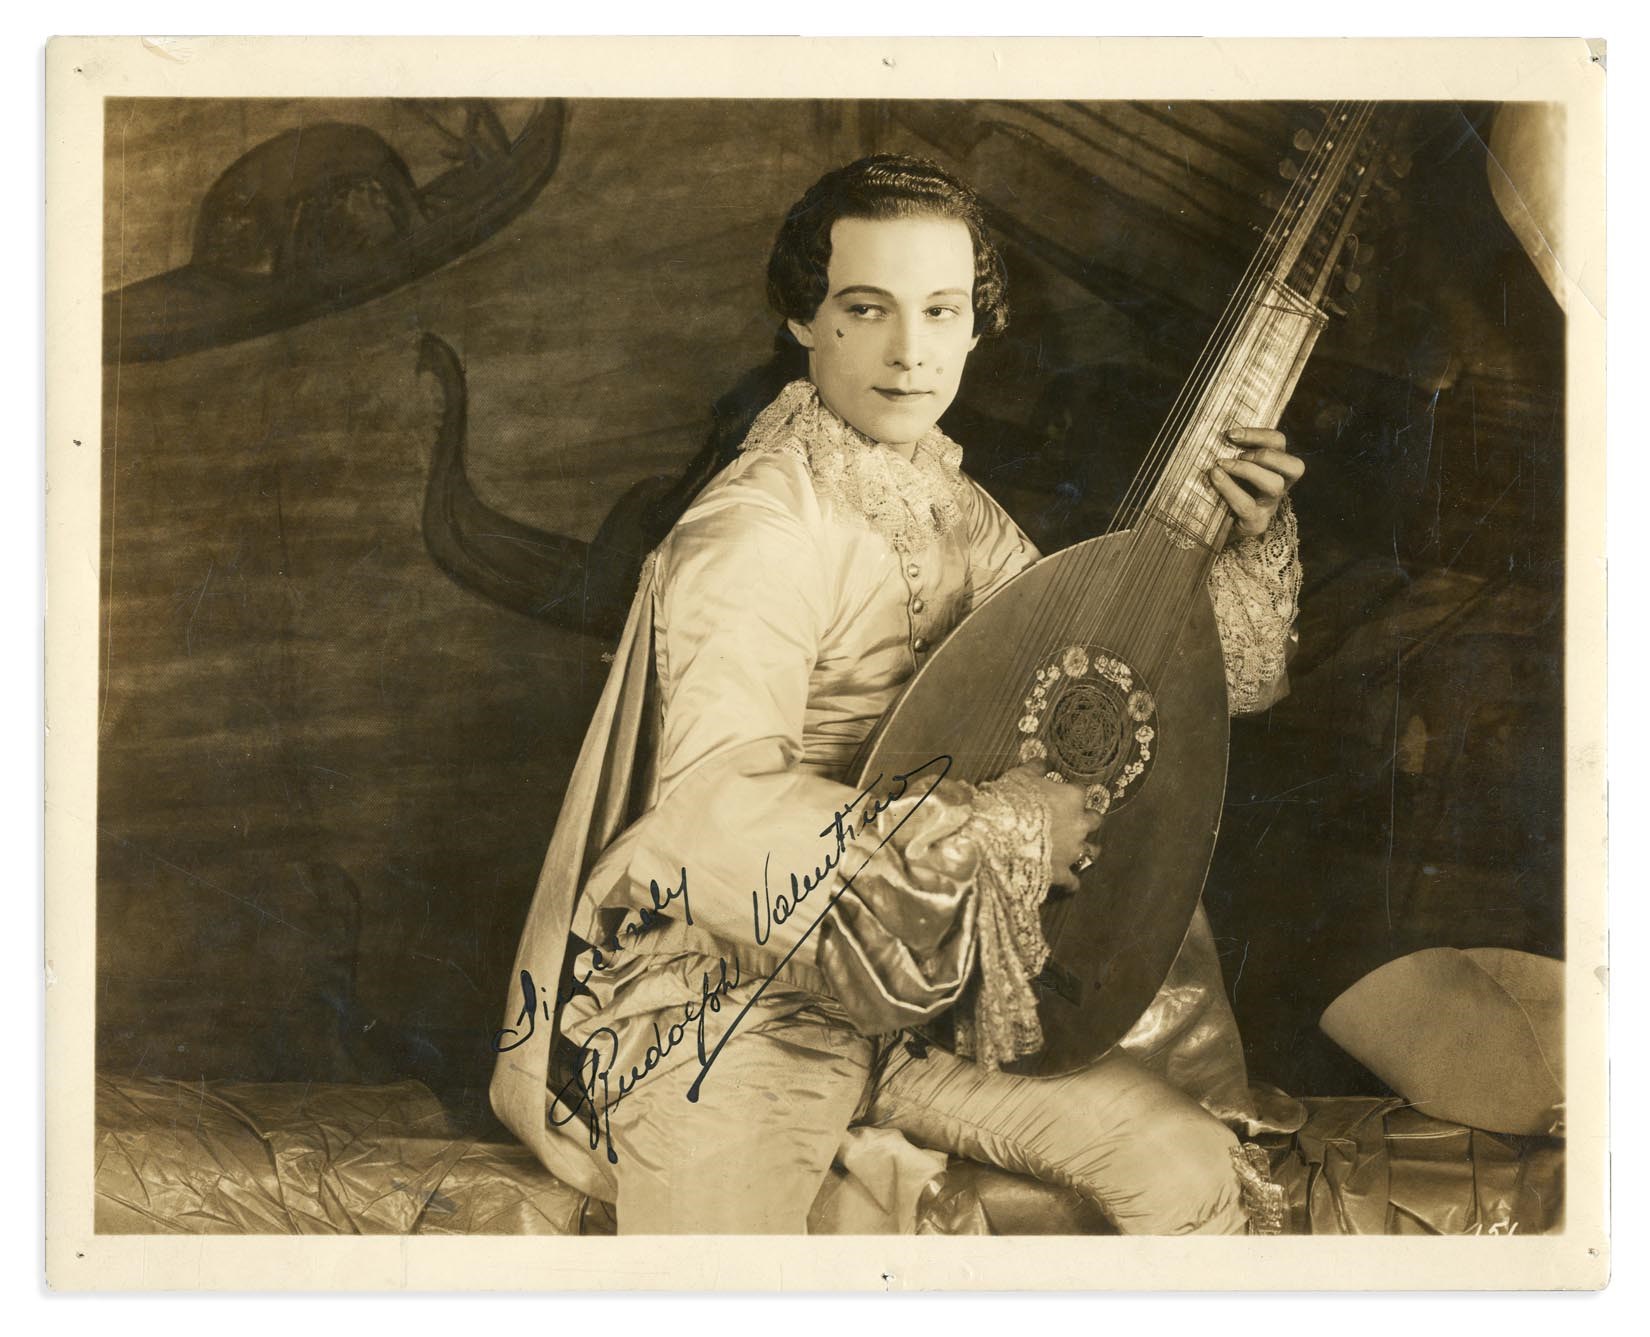 Exceptional Rudolph Valentino Signed Photograph